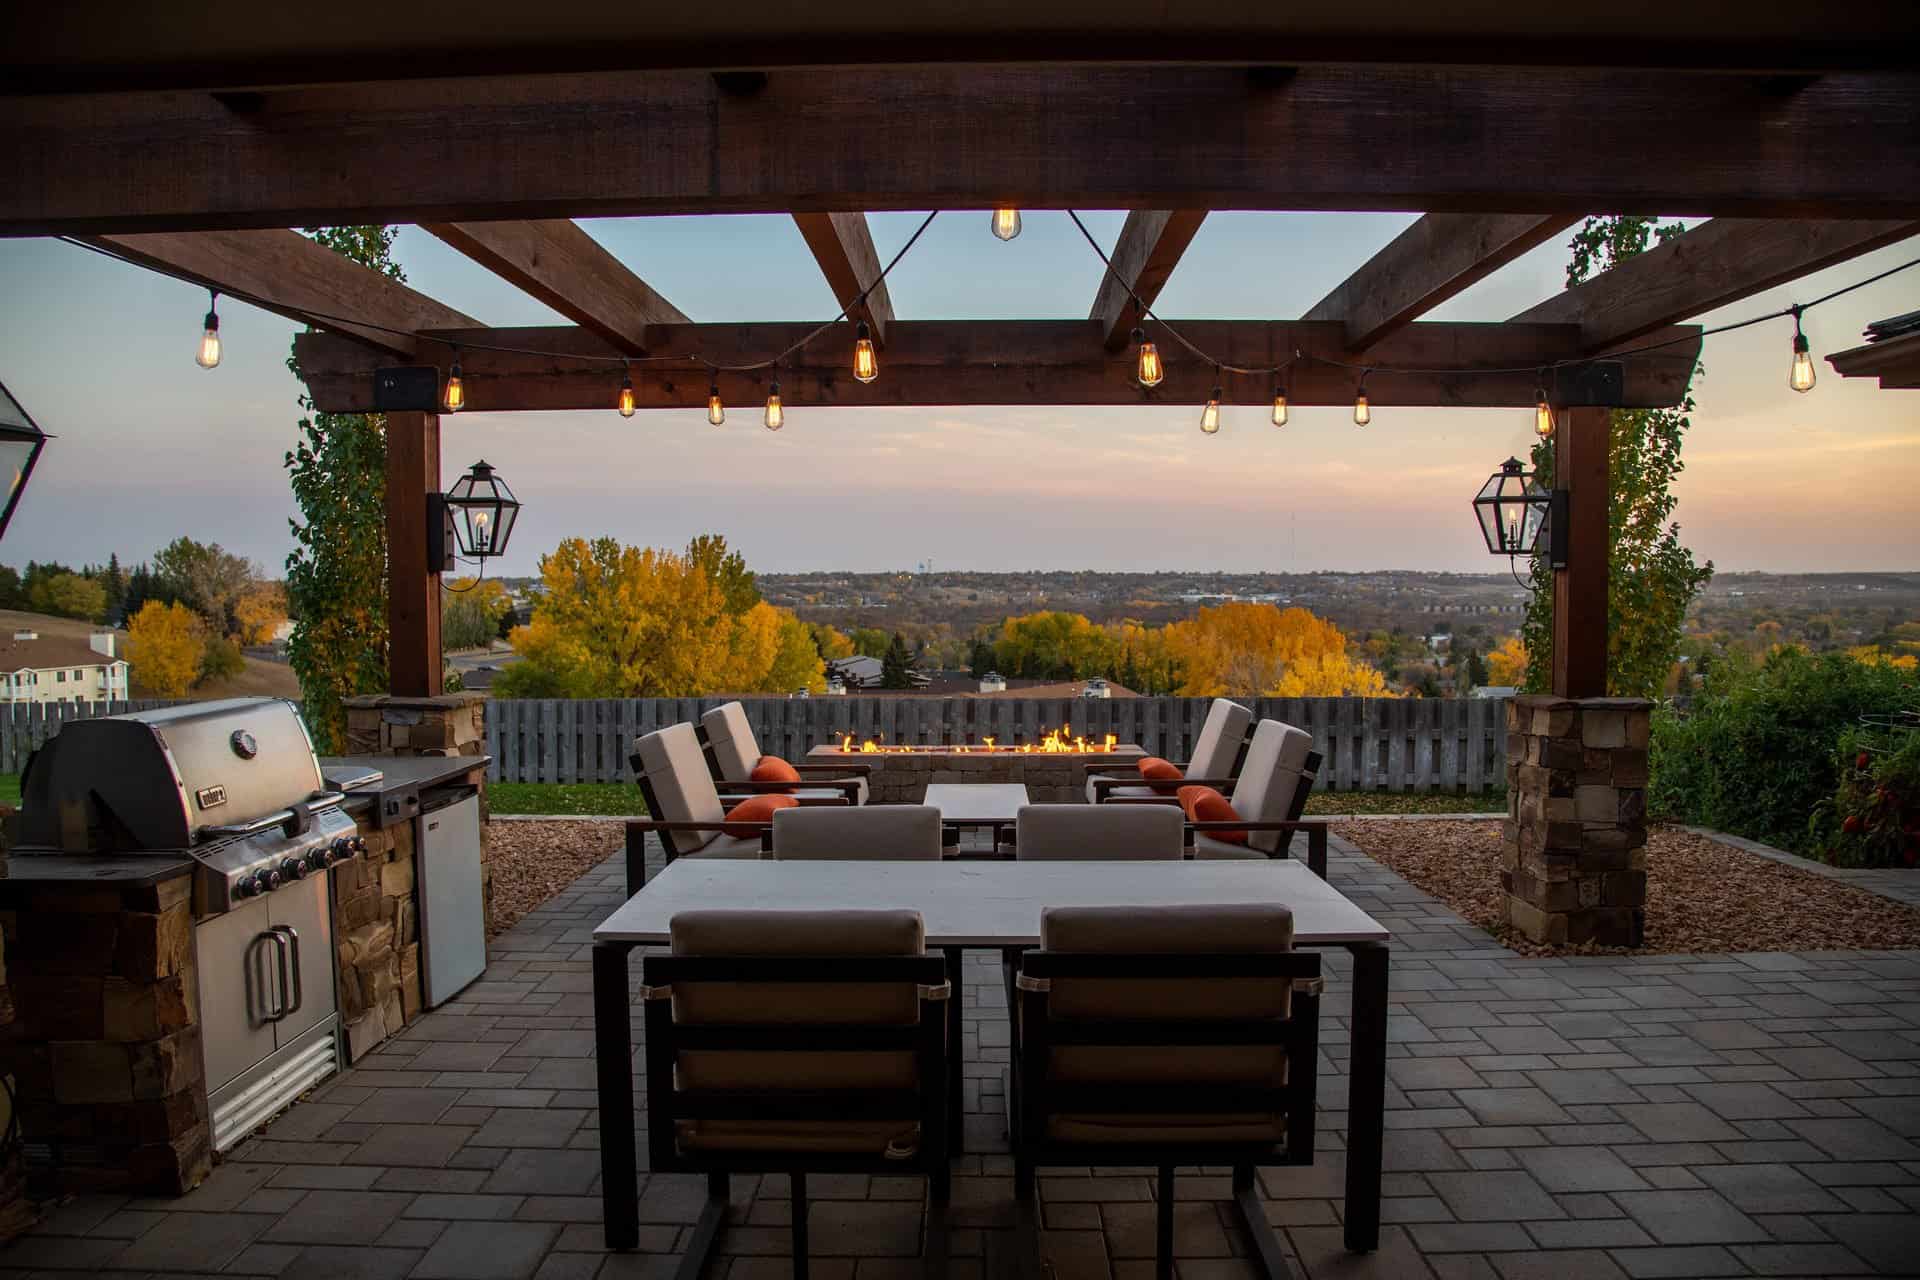 Create an Inviting Outdoor Sitting/Dining Area